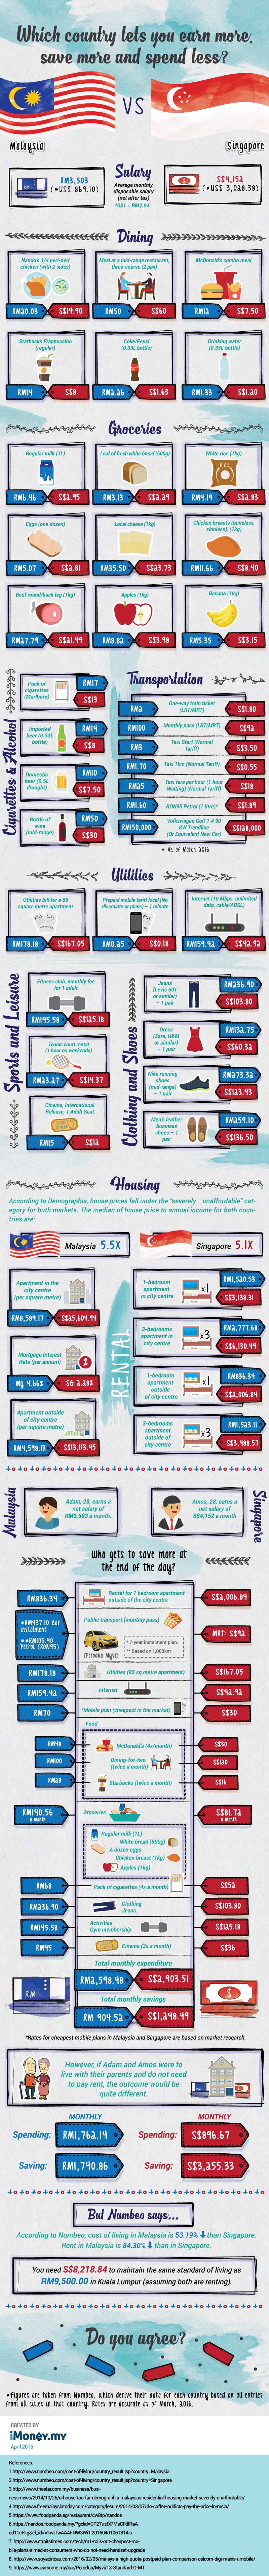 R2_[INFOGRAPHIC]--Malaysia-vs.-Singapore--Which-country-will-let-you-earn-more,-save-more,-and-spend-less- (1)